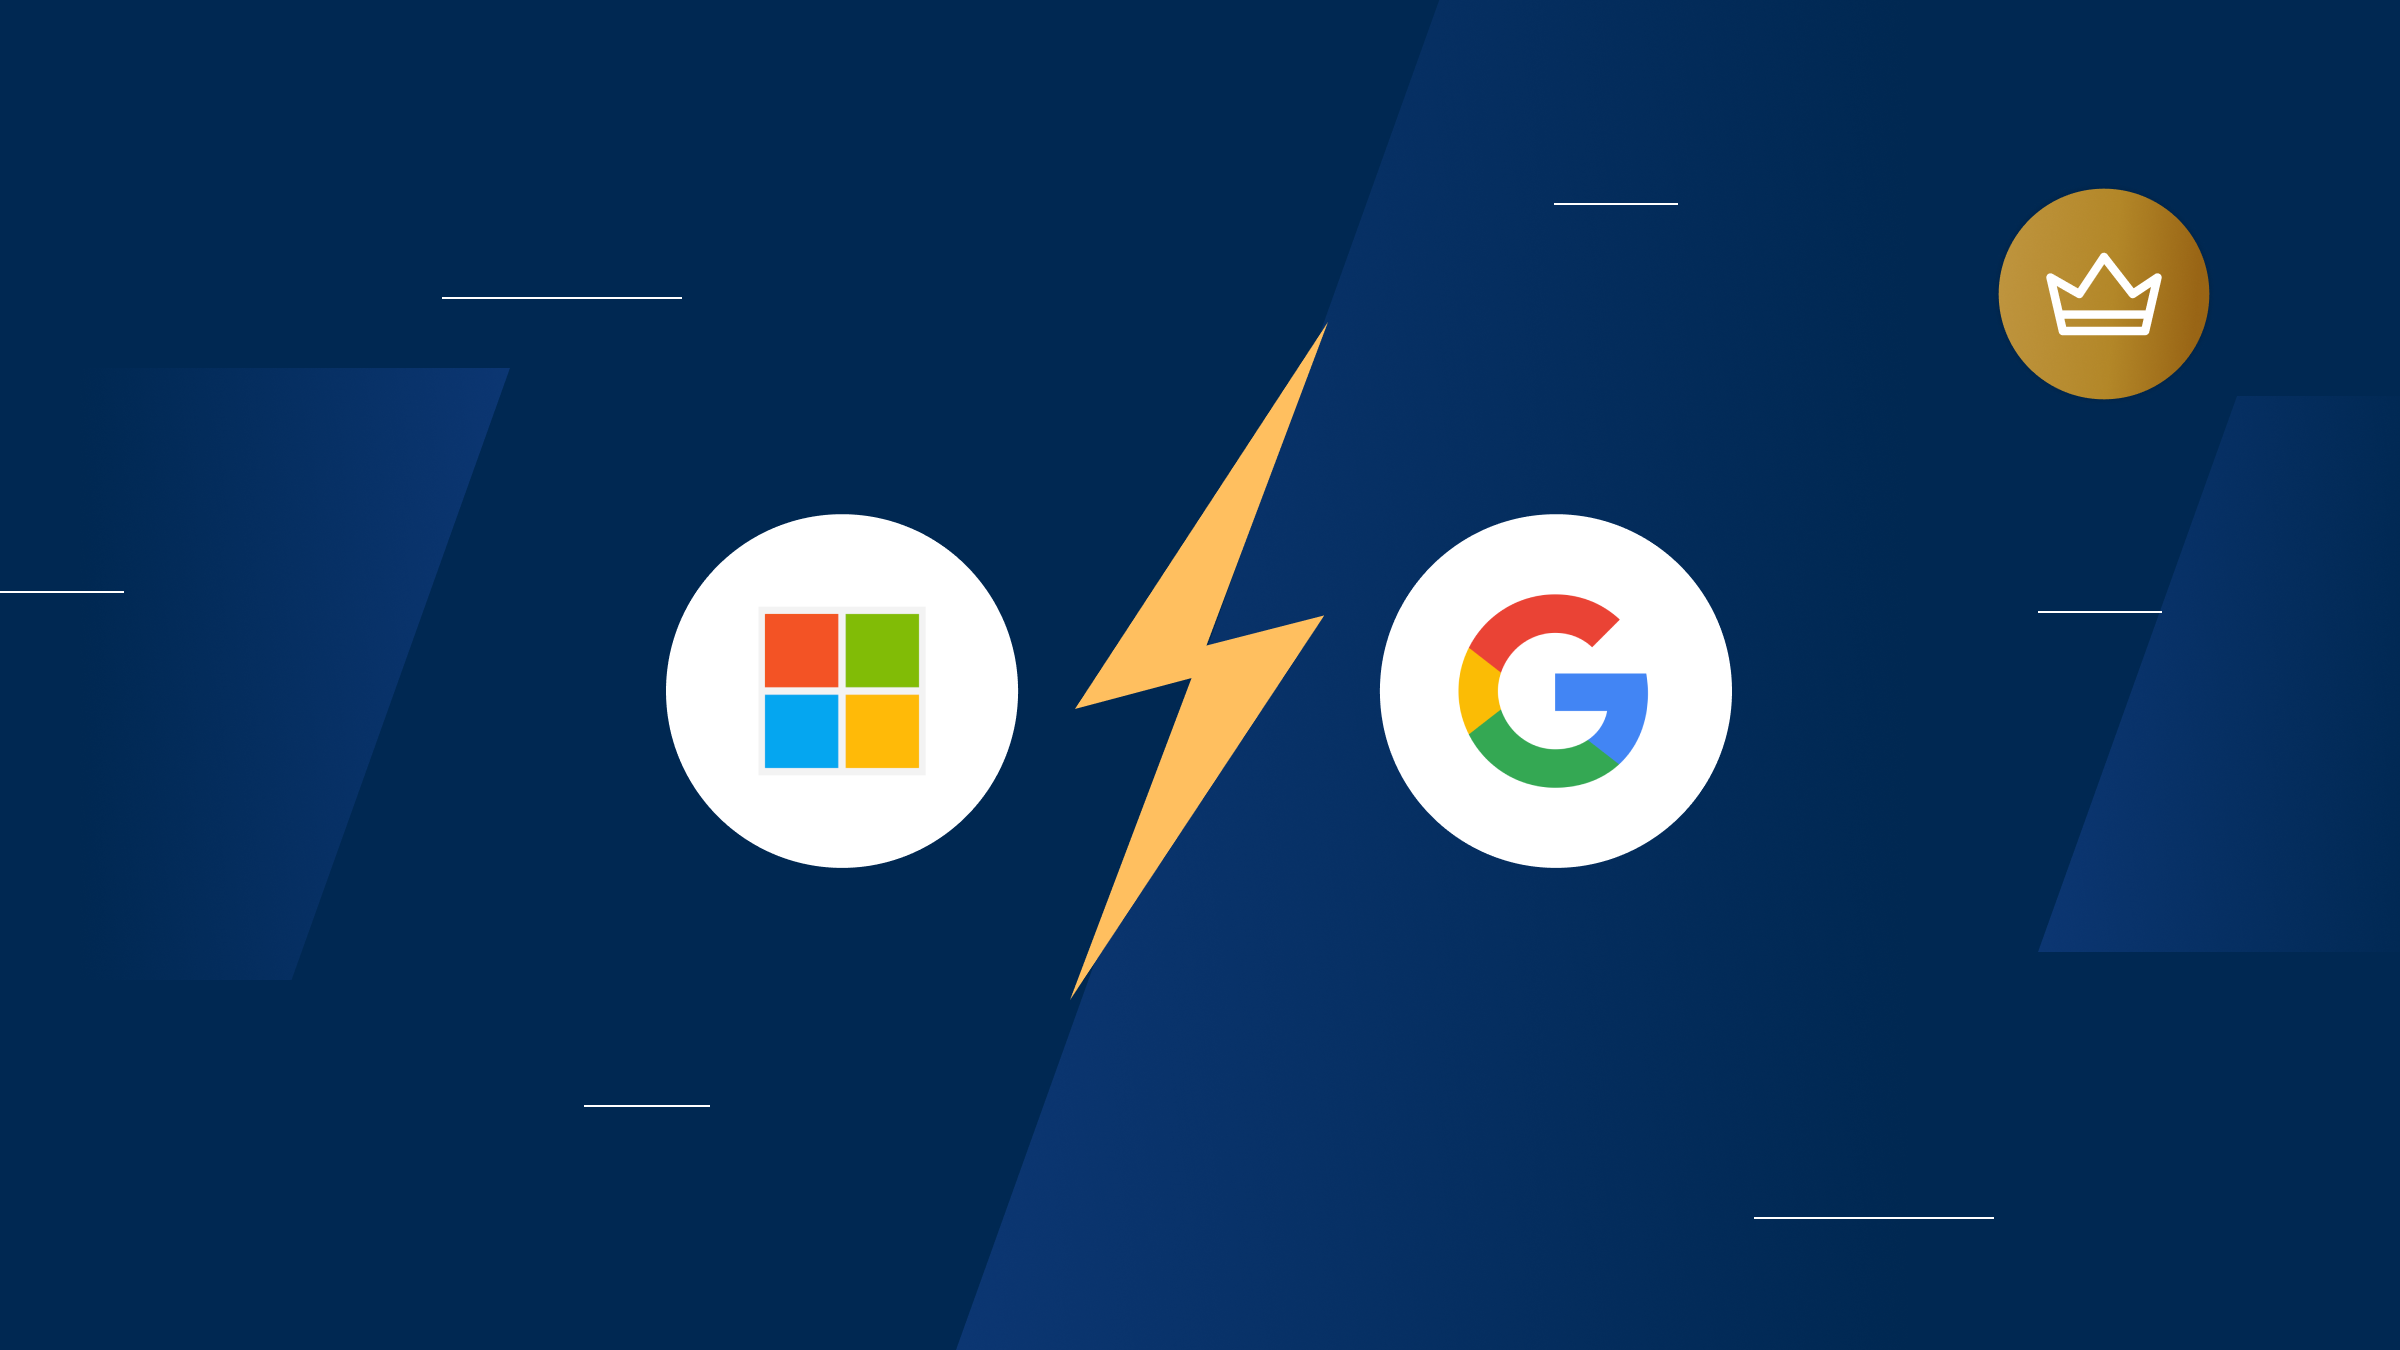 Microsoft vs. Google – the battle for AI-powered search